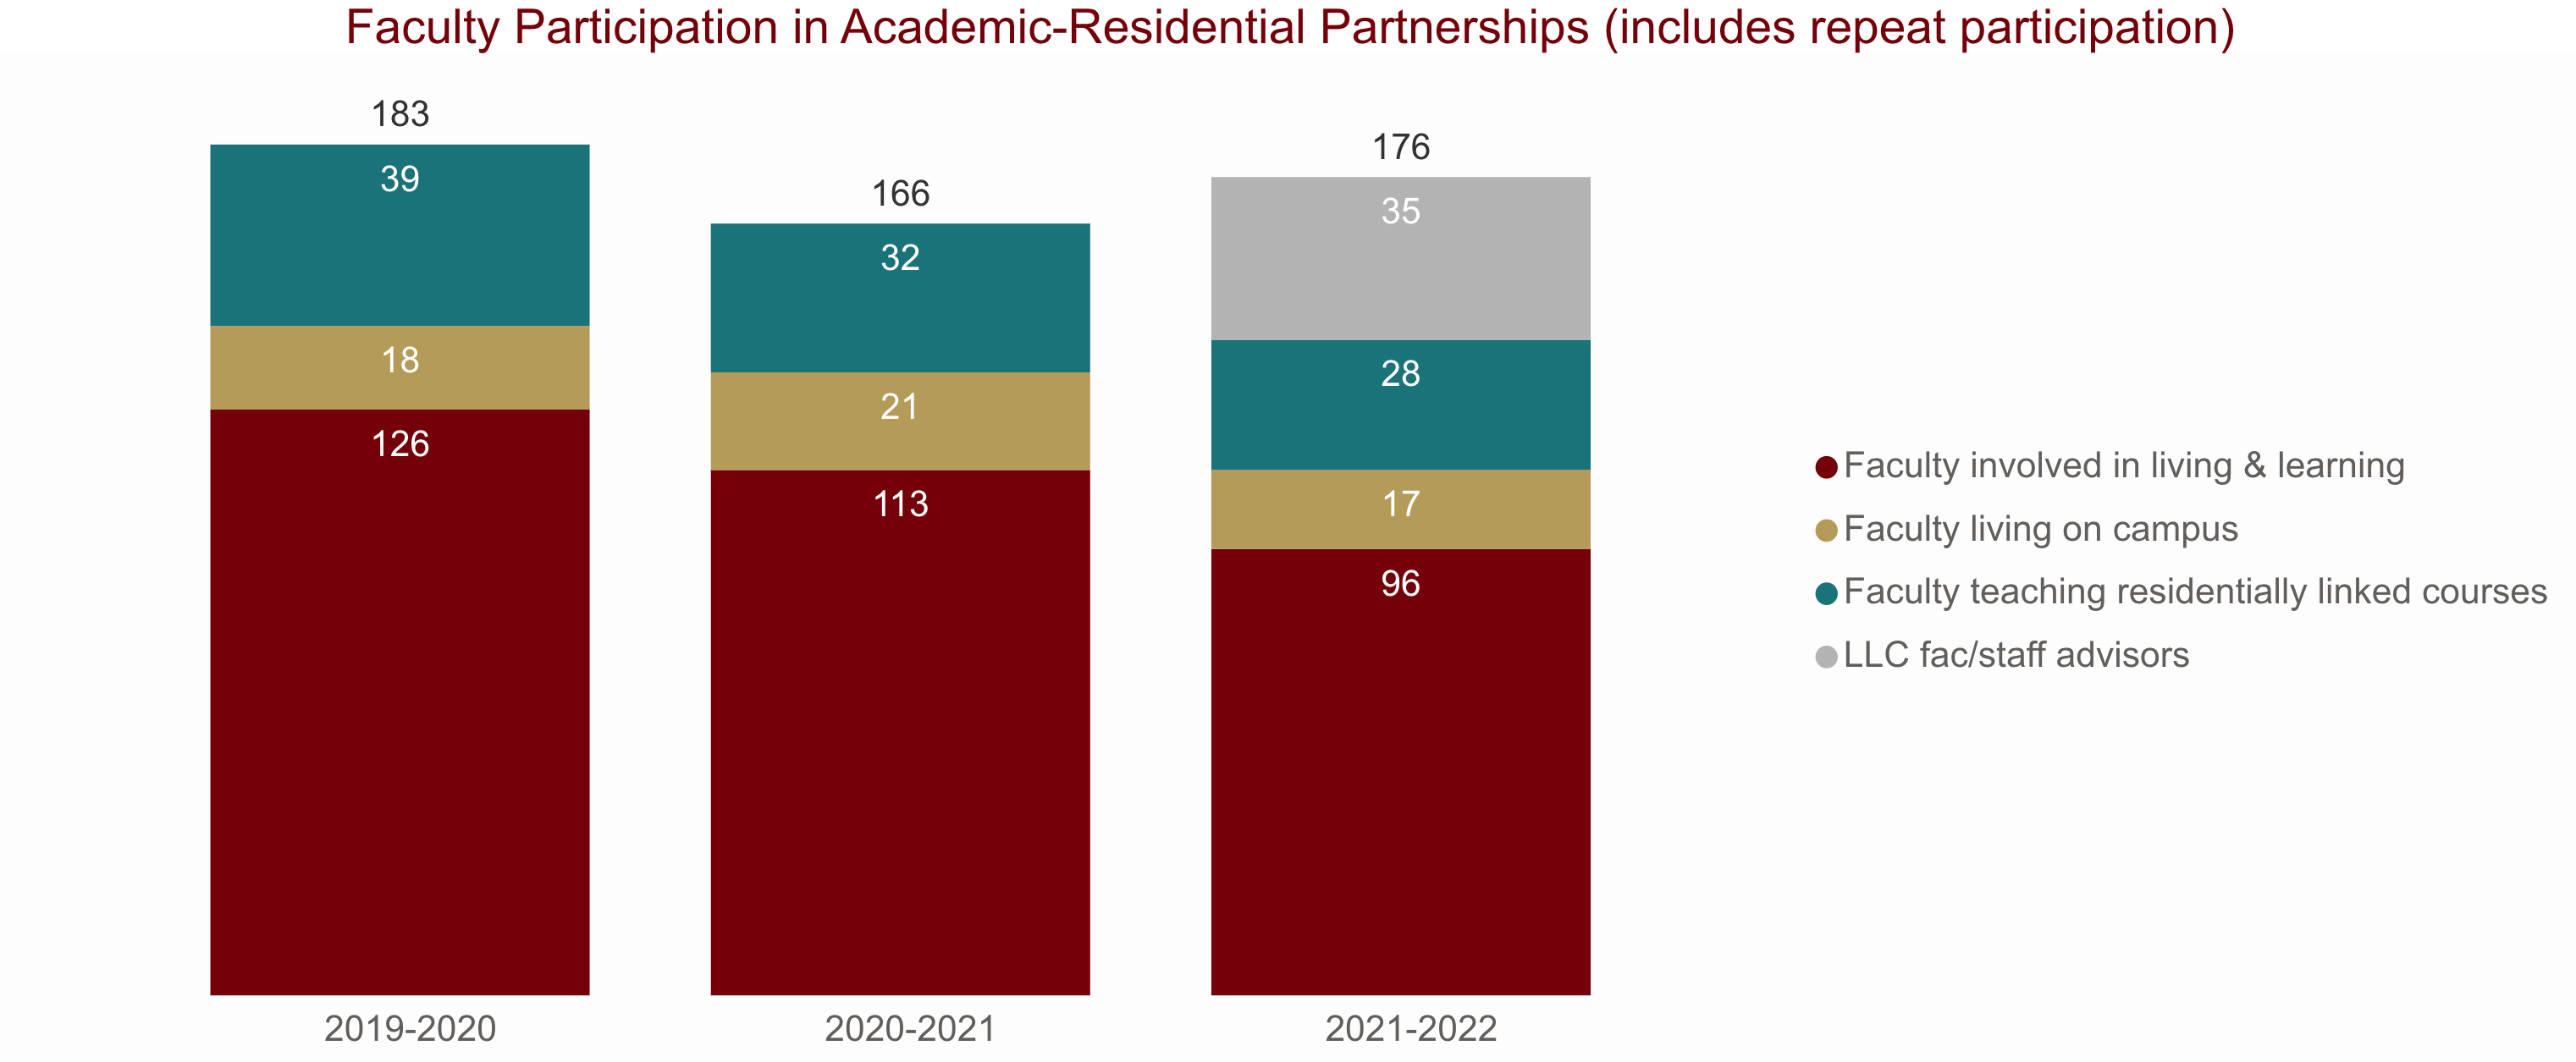 Bar chart showing faculty participation in academic-residential partnerships including repeat participation